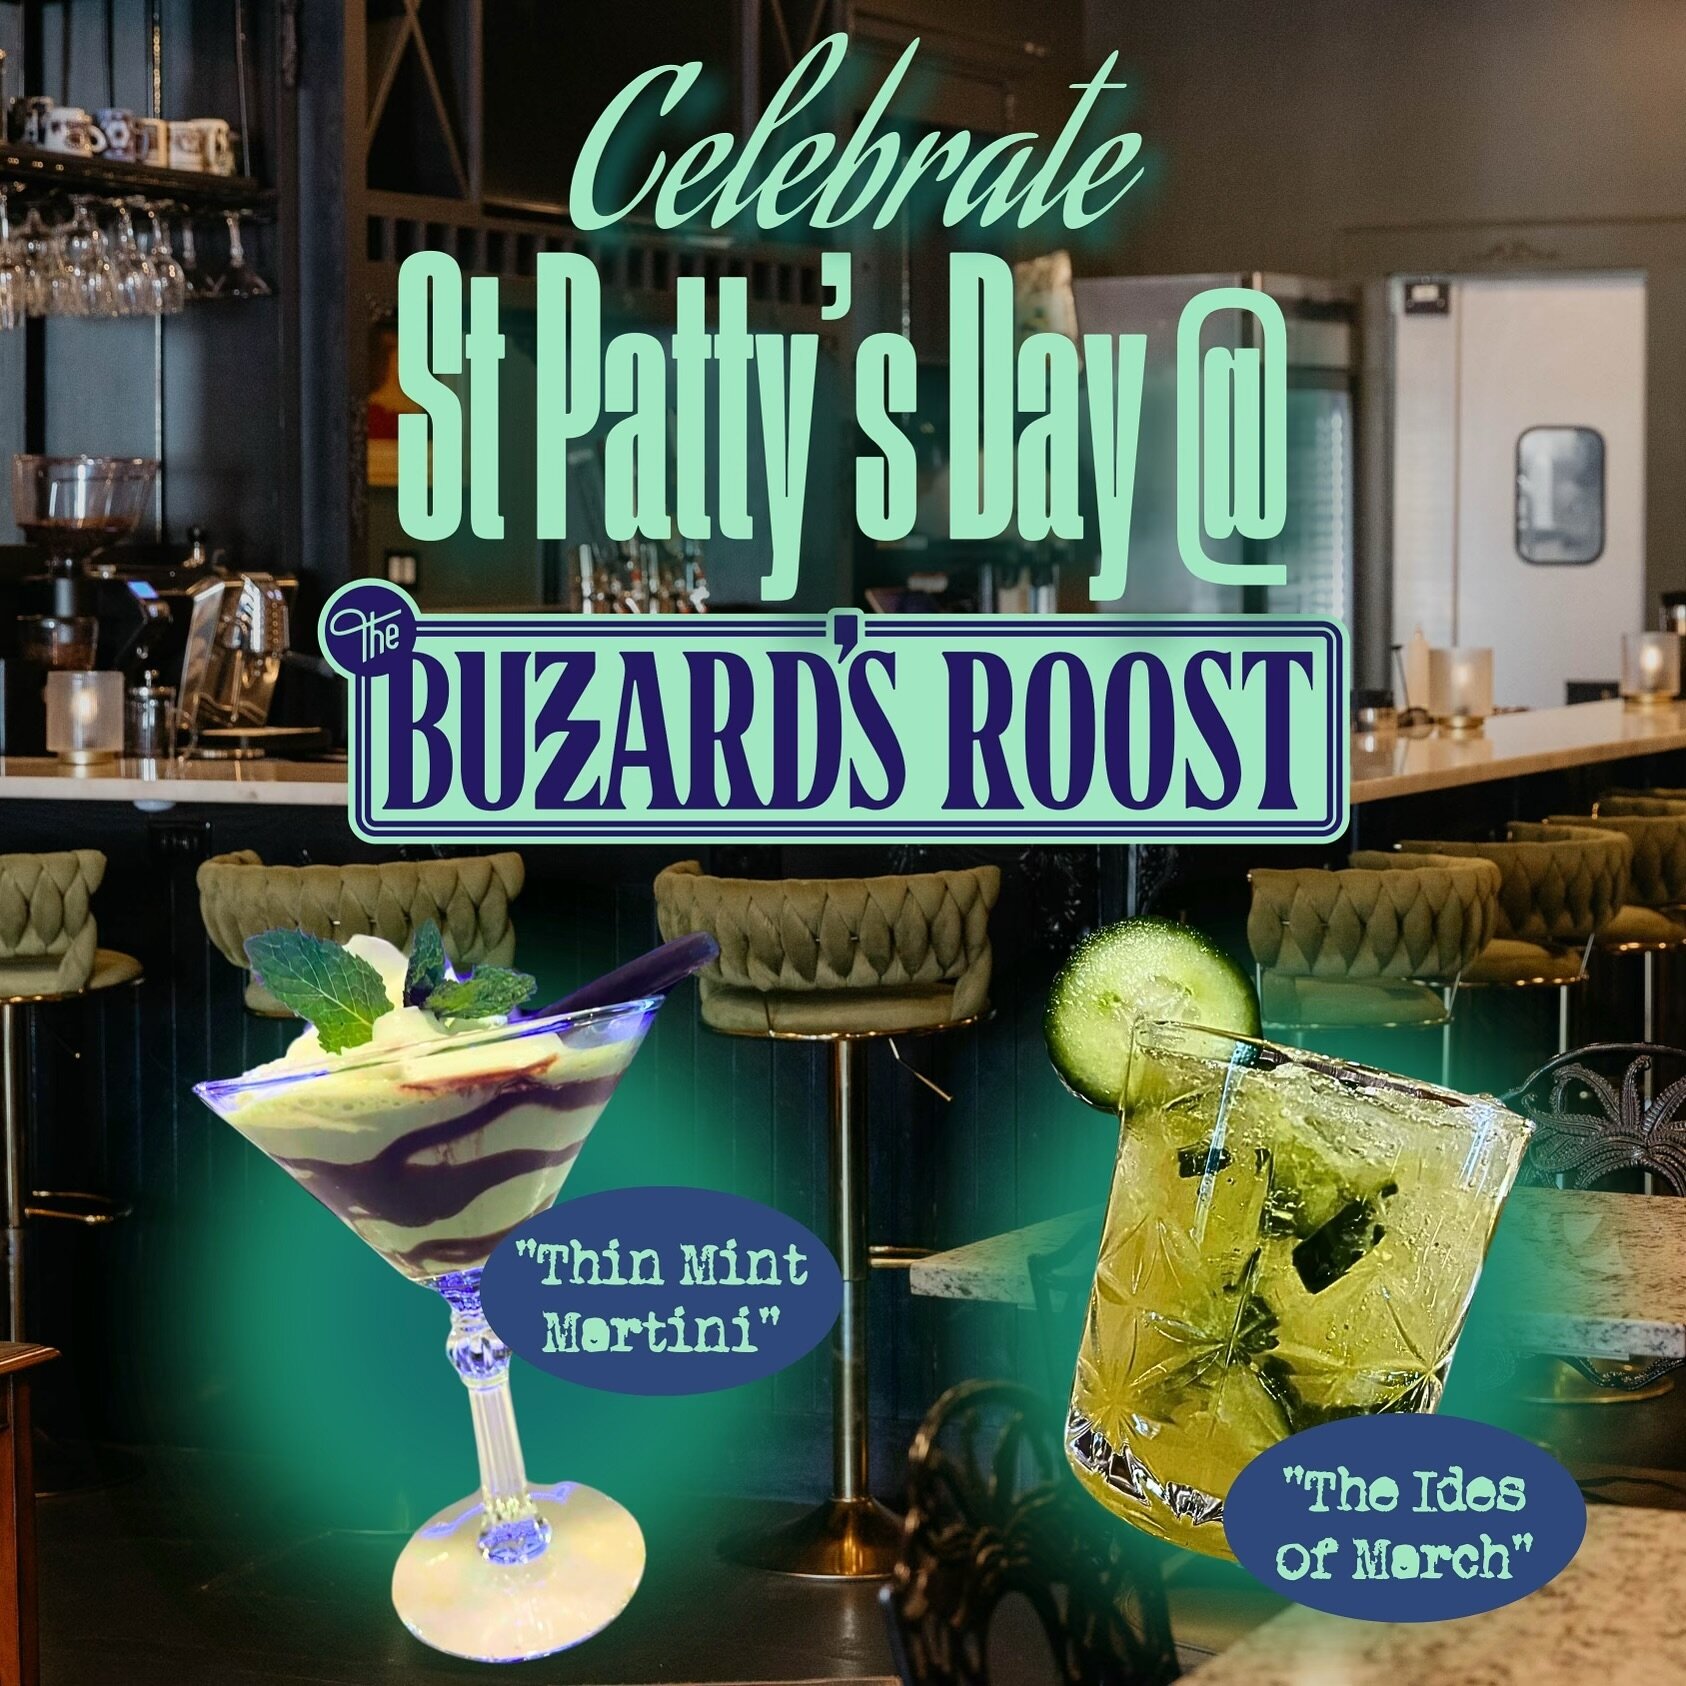 Happy St. Paddy&rsquo;s Day! Celebrate by coming by to have one of our green drink specials (so you don&rsquo;t get pinched, obviously!) at #thebuzzardsroostms